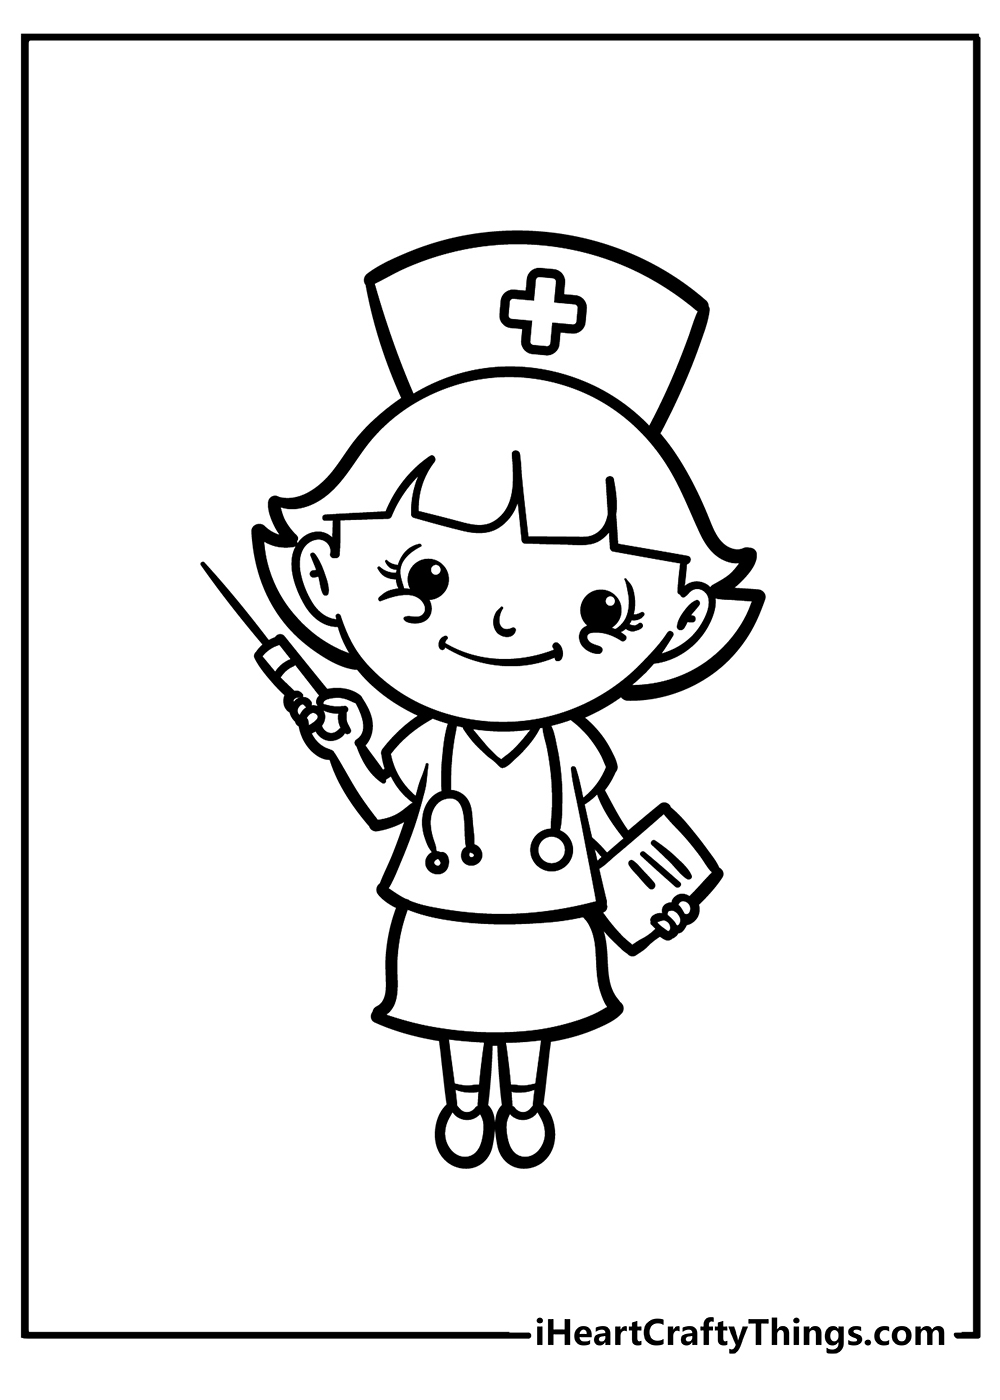 Nurse Coloring Pages for adults free printable